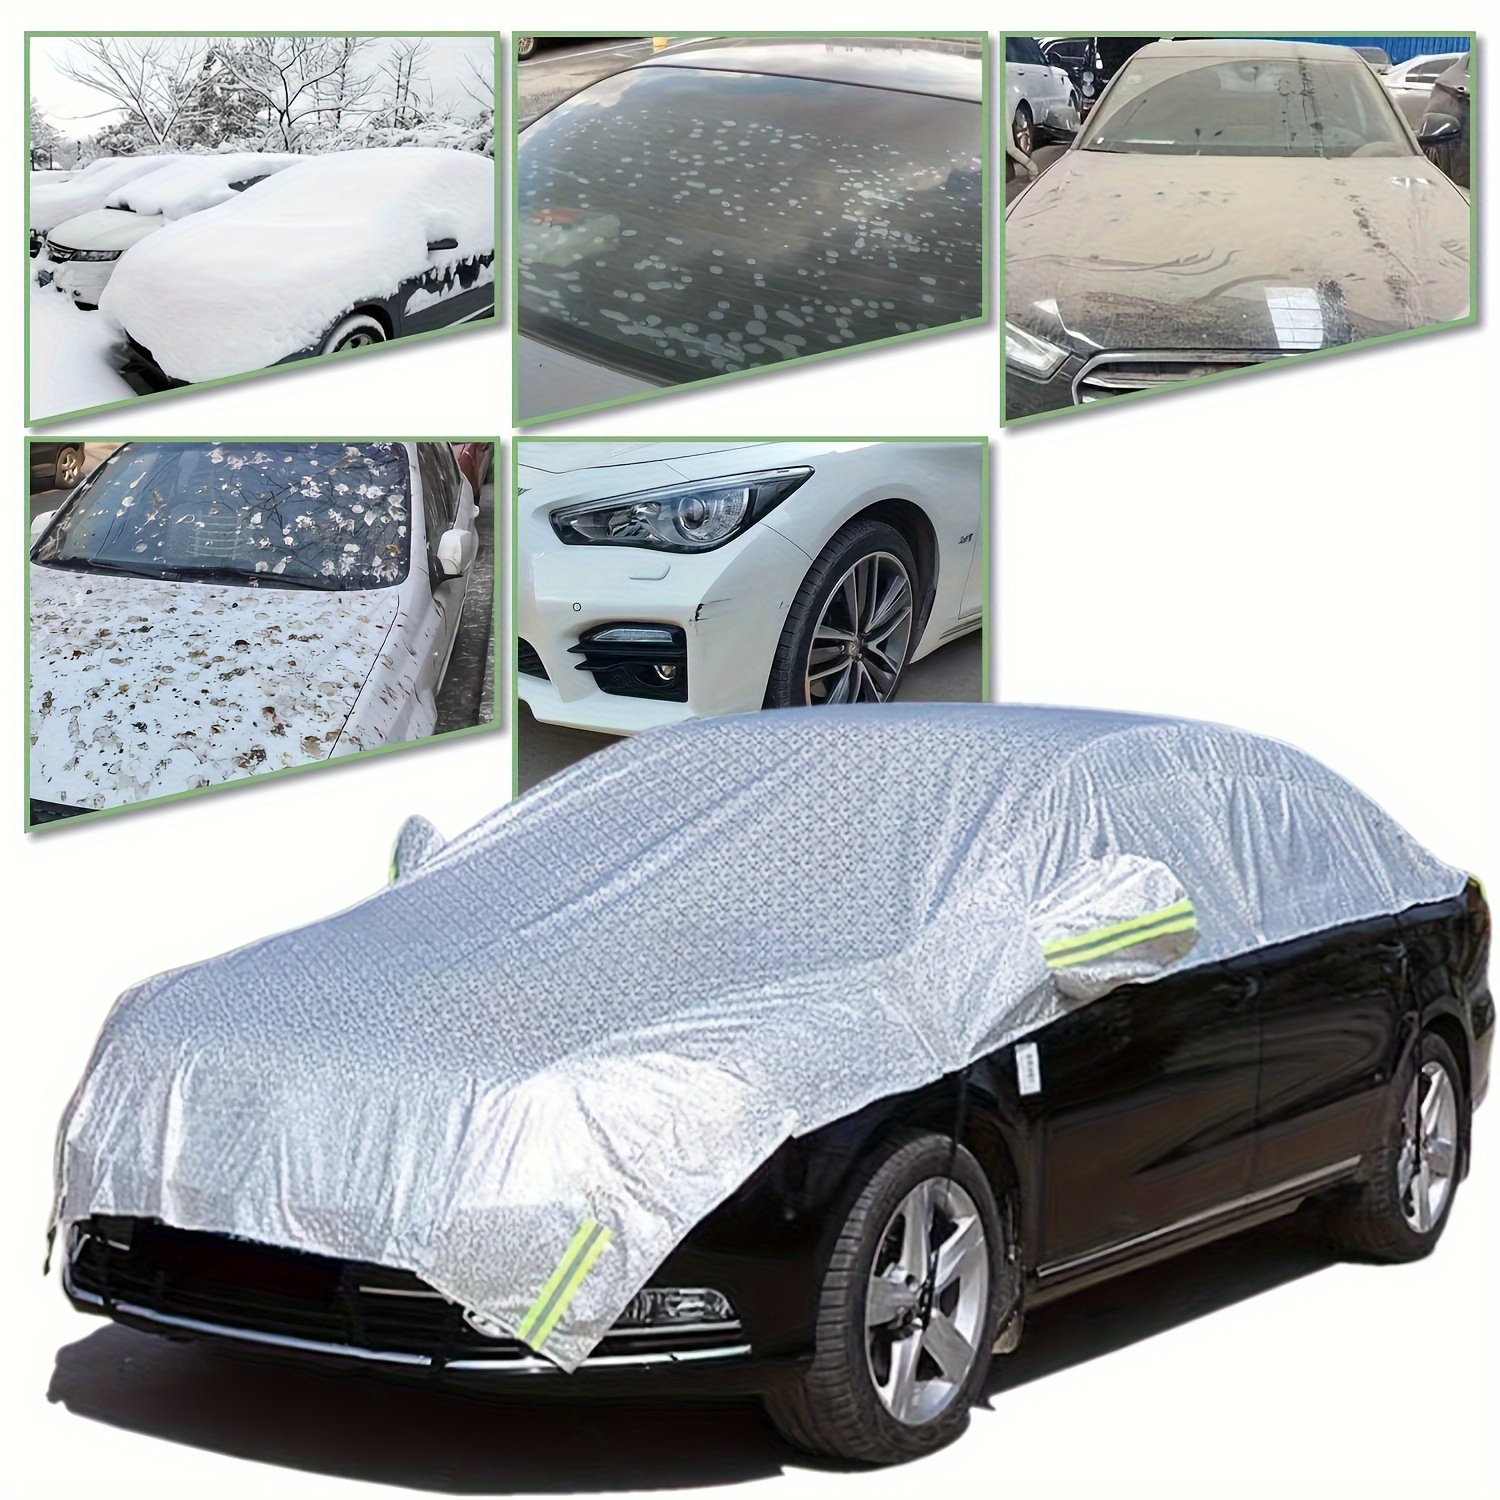 

All-weather Sedan Car Cover - Waterproof, Dustproof, Uv & Snow Resistant With Sun Shade For Windshield And Roof Protection Car Covers For Cars Outside Waterproof Car Cover Waterproof All Weather